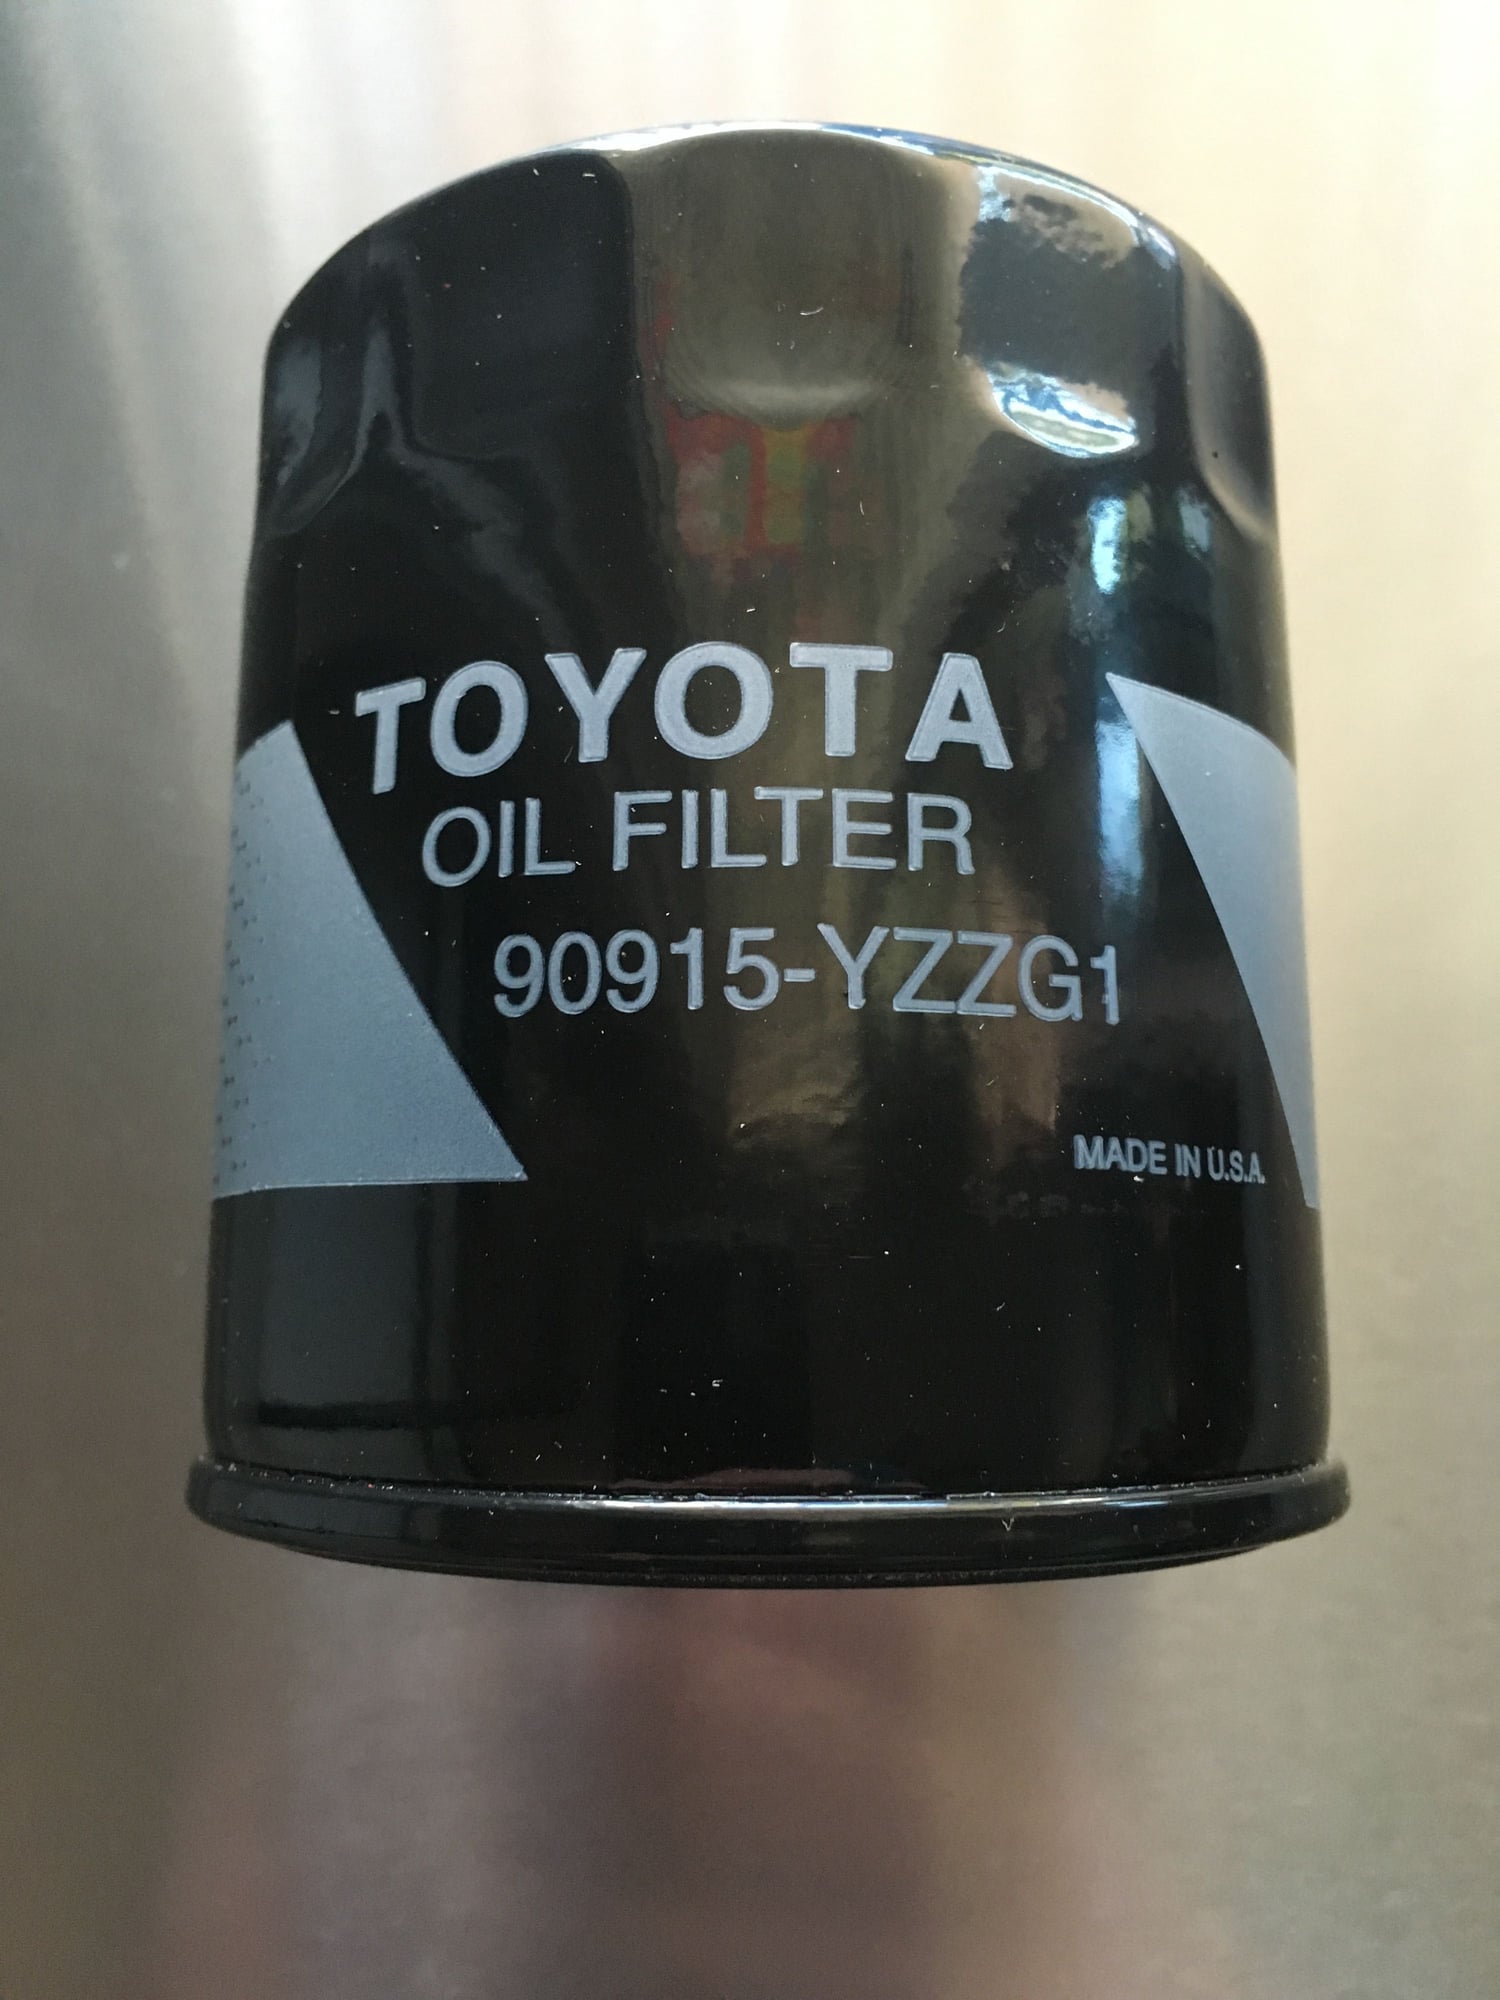 Miscellaneous - Original Toyota Oil Filter 90915-YZZG1 - New - Los Angeles, CA 90017, United States